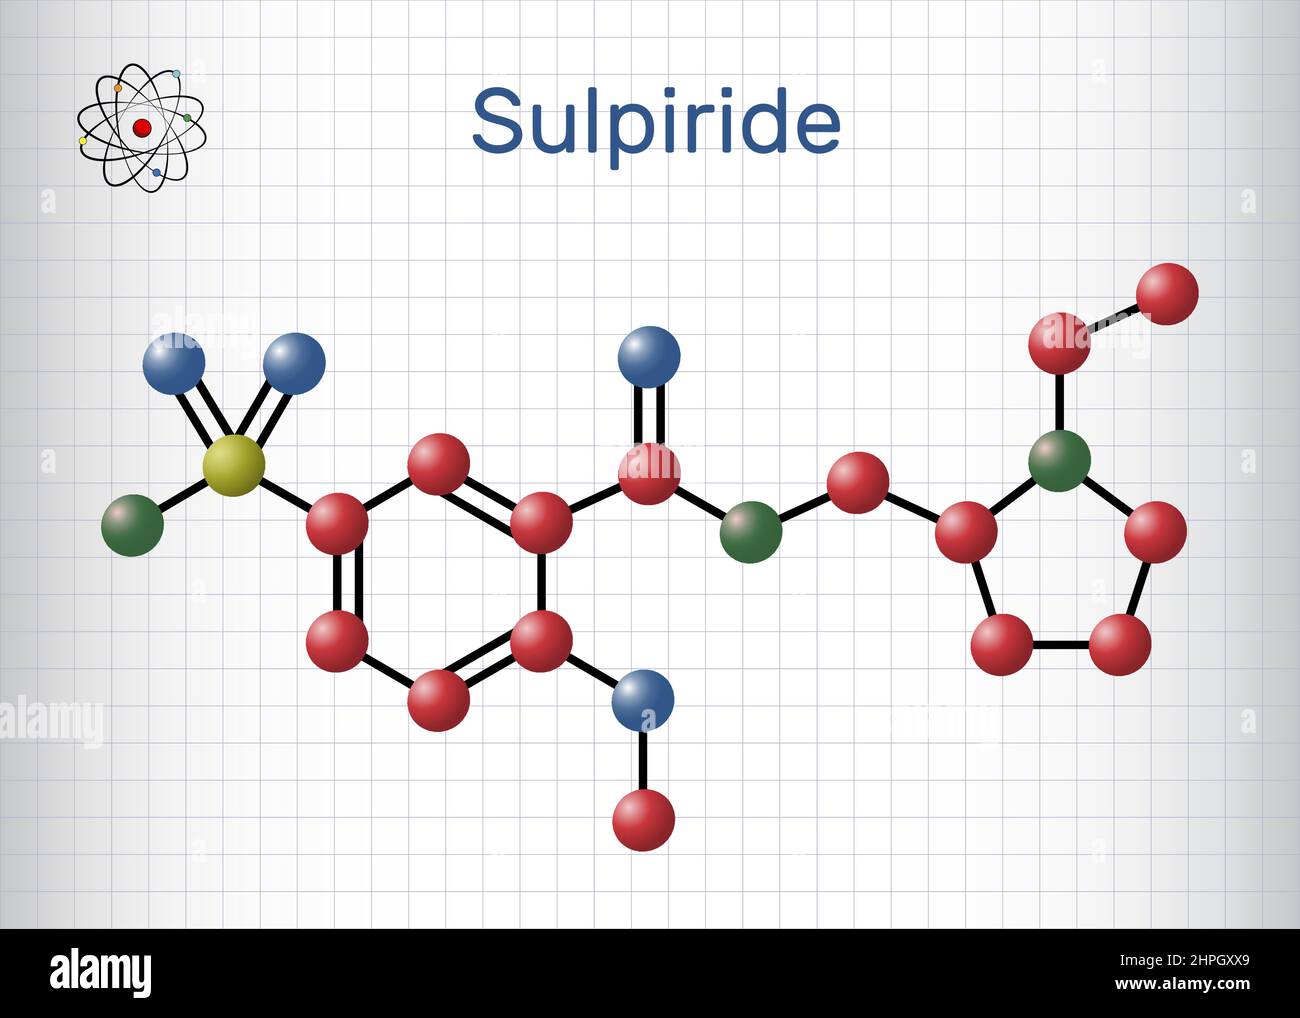 Sulpiride molecule. It is antipsychotic, neuroleptic medication for the treatment of acute and chronic schizophrenia. Molecule model. Sheet of paper Stock Vector